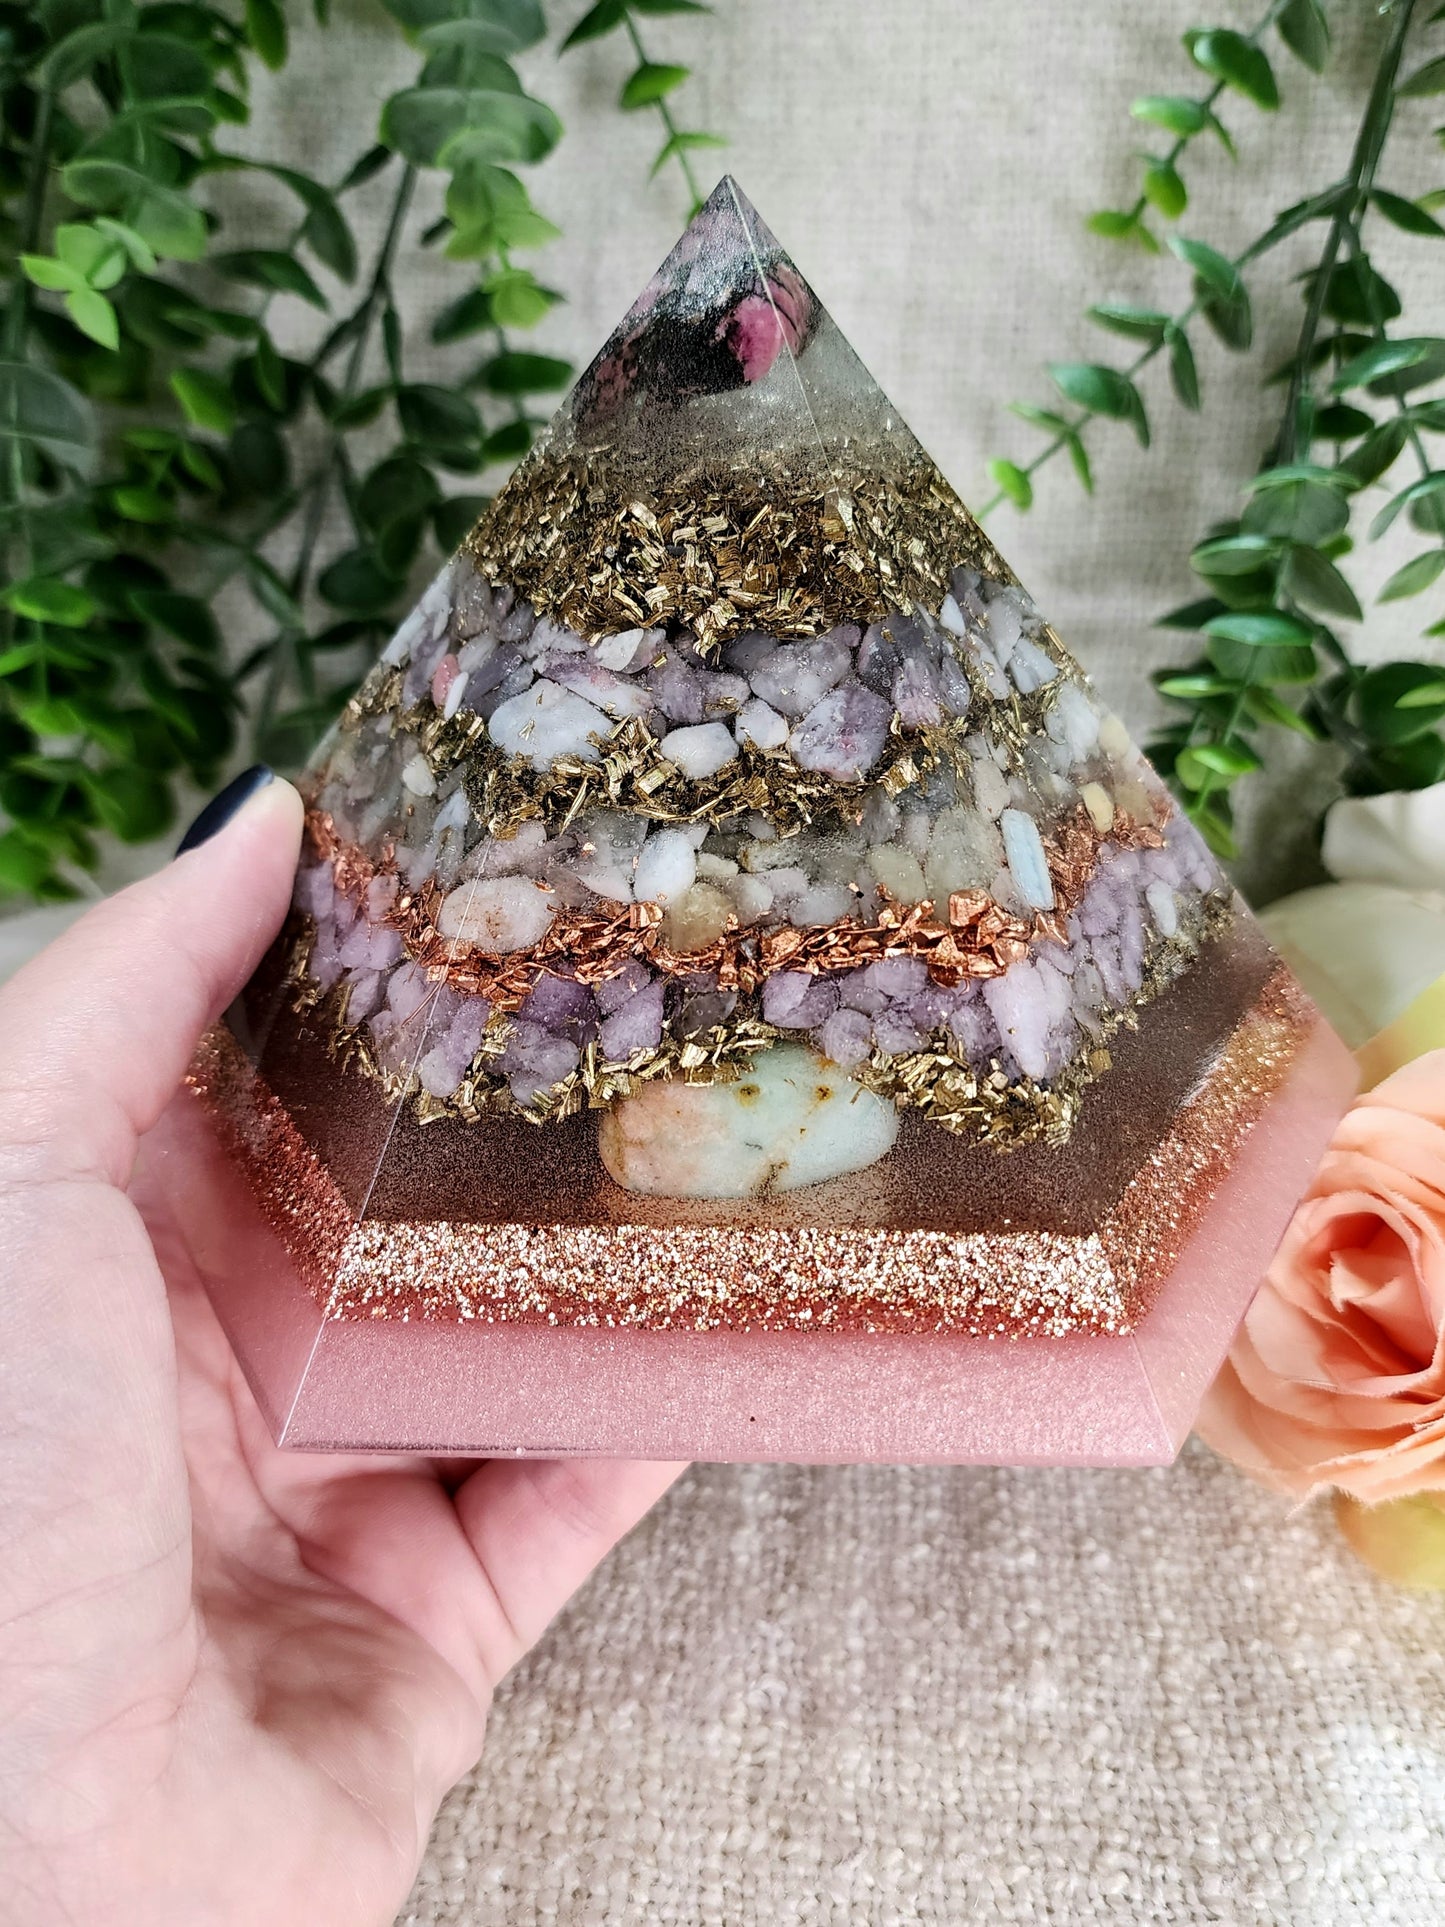 LOVE - Special Edition Hexagonal Pyramid! - EMF Protector - Rhodonite, Pink Tourmaline, Morganite, Kunzite and Chrysoprase with Golden Bronze Brass and Copper Metals